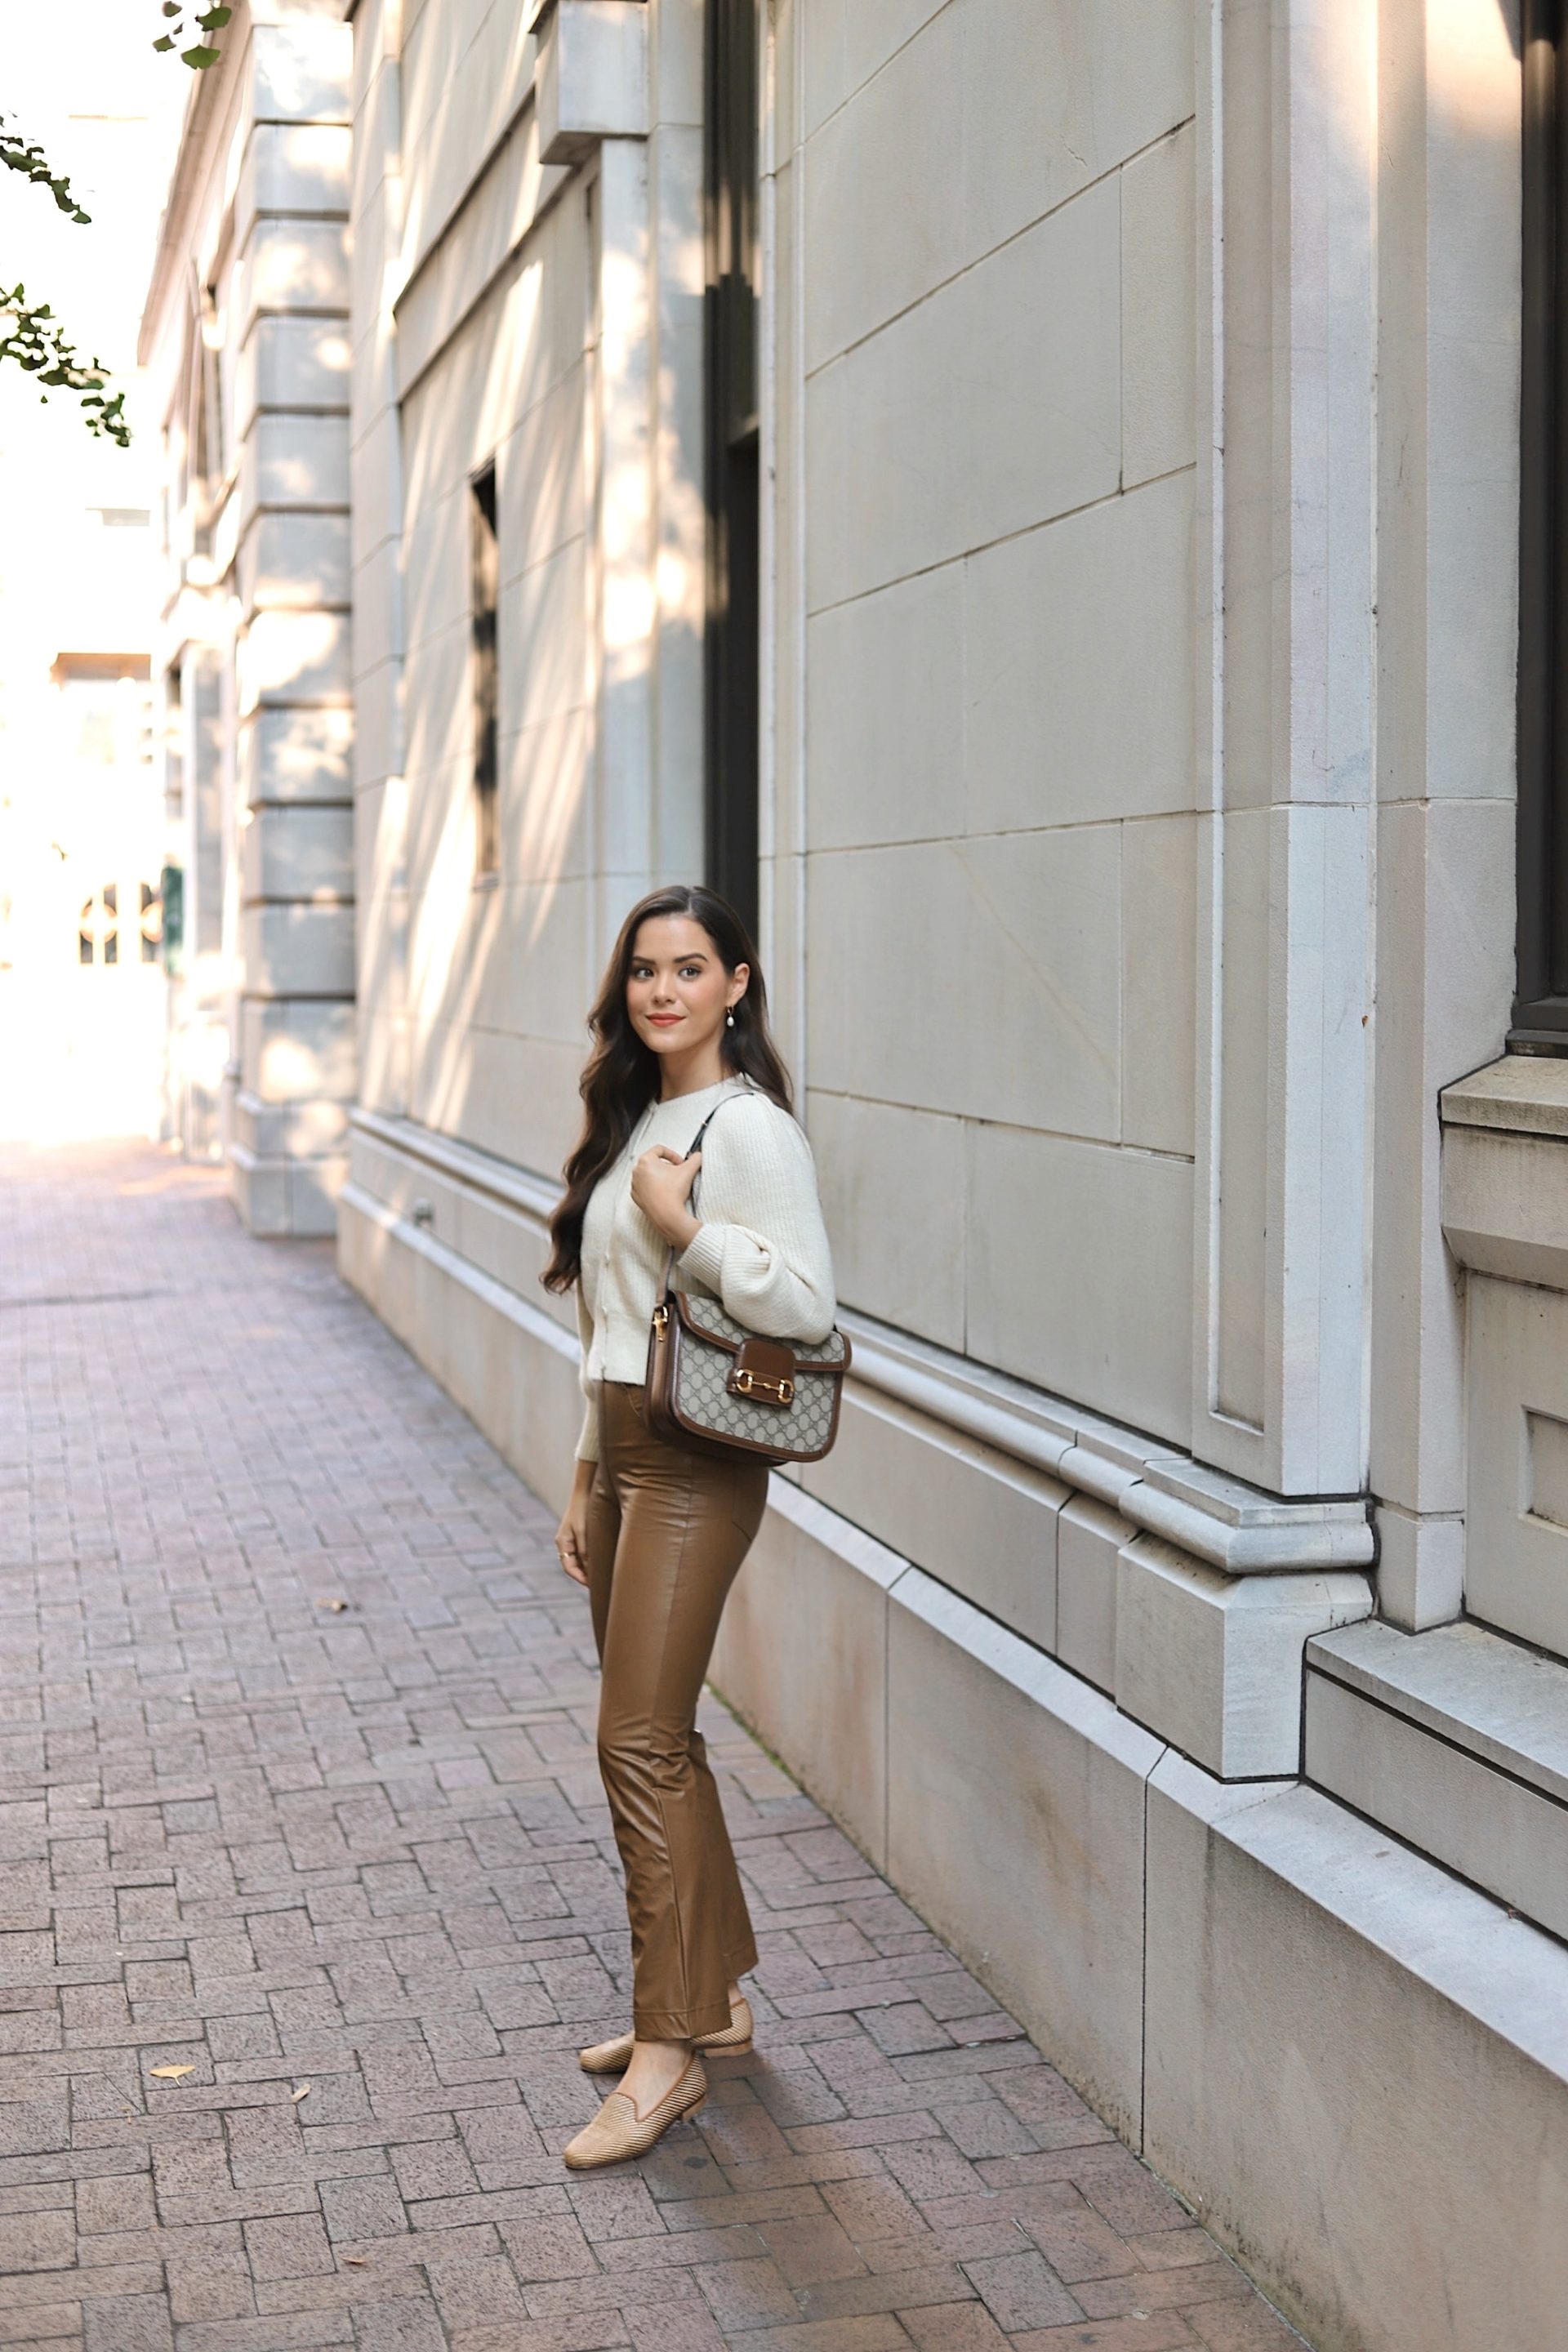 LEATHER PANTS FOR FALL | MUSINGS BY MADISON - STYLE AND LIFESTYLE BLOG